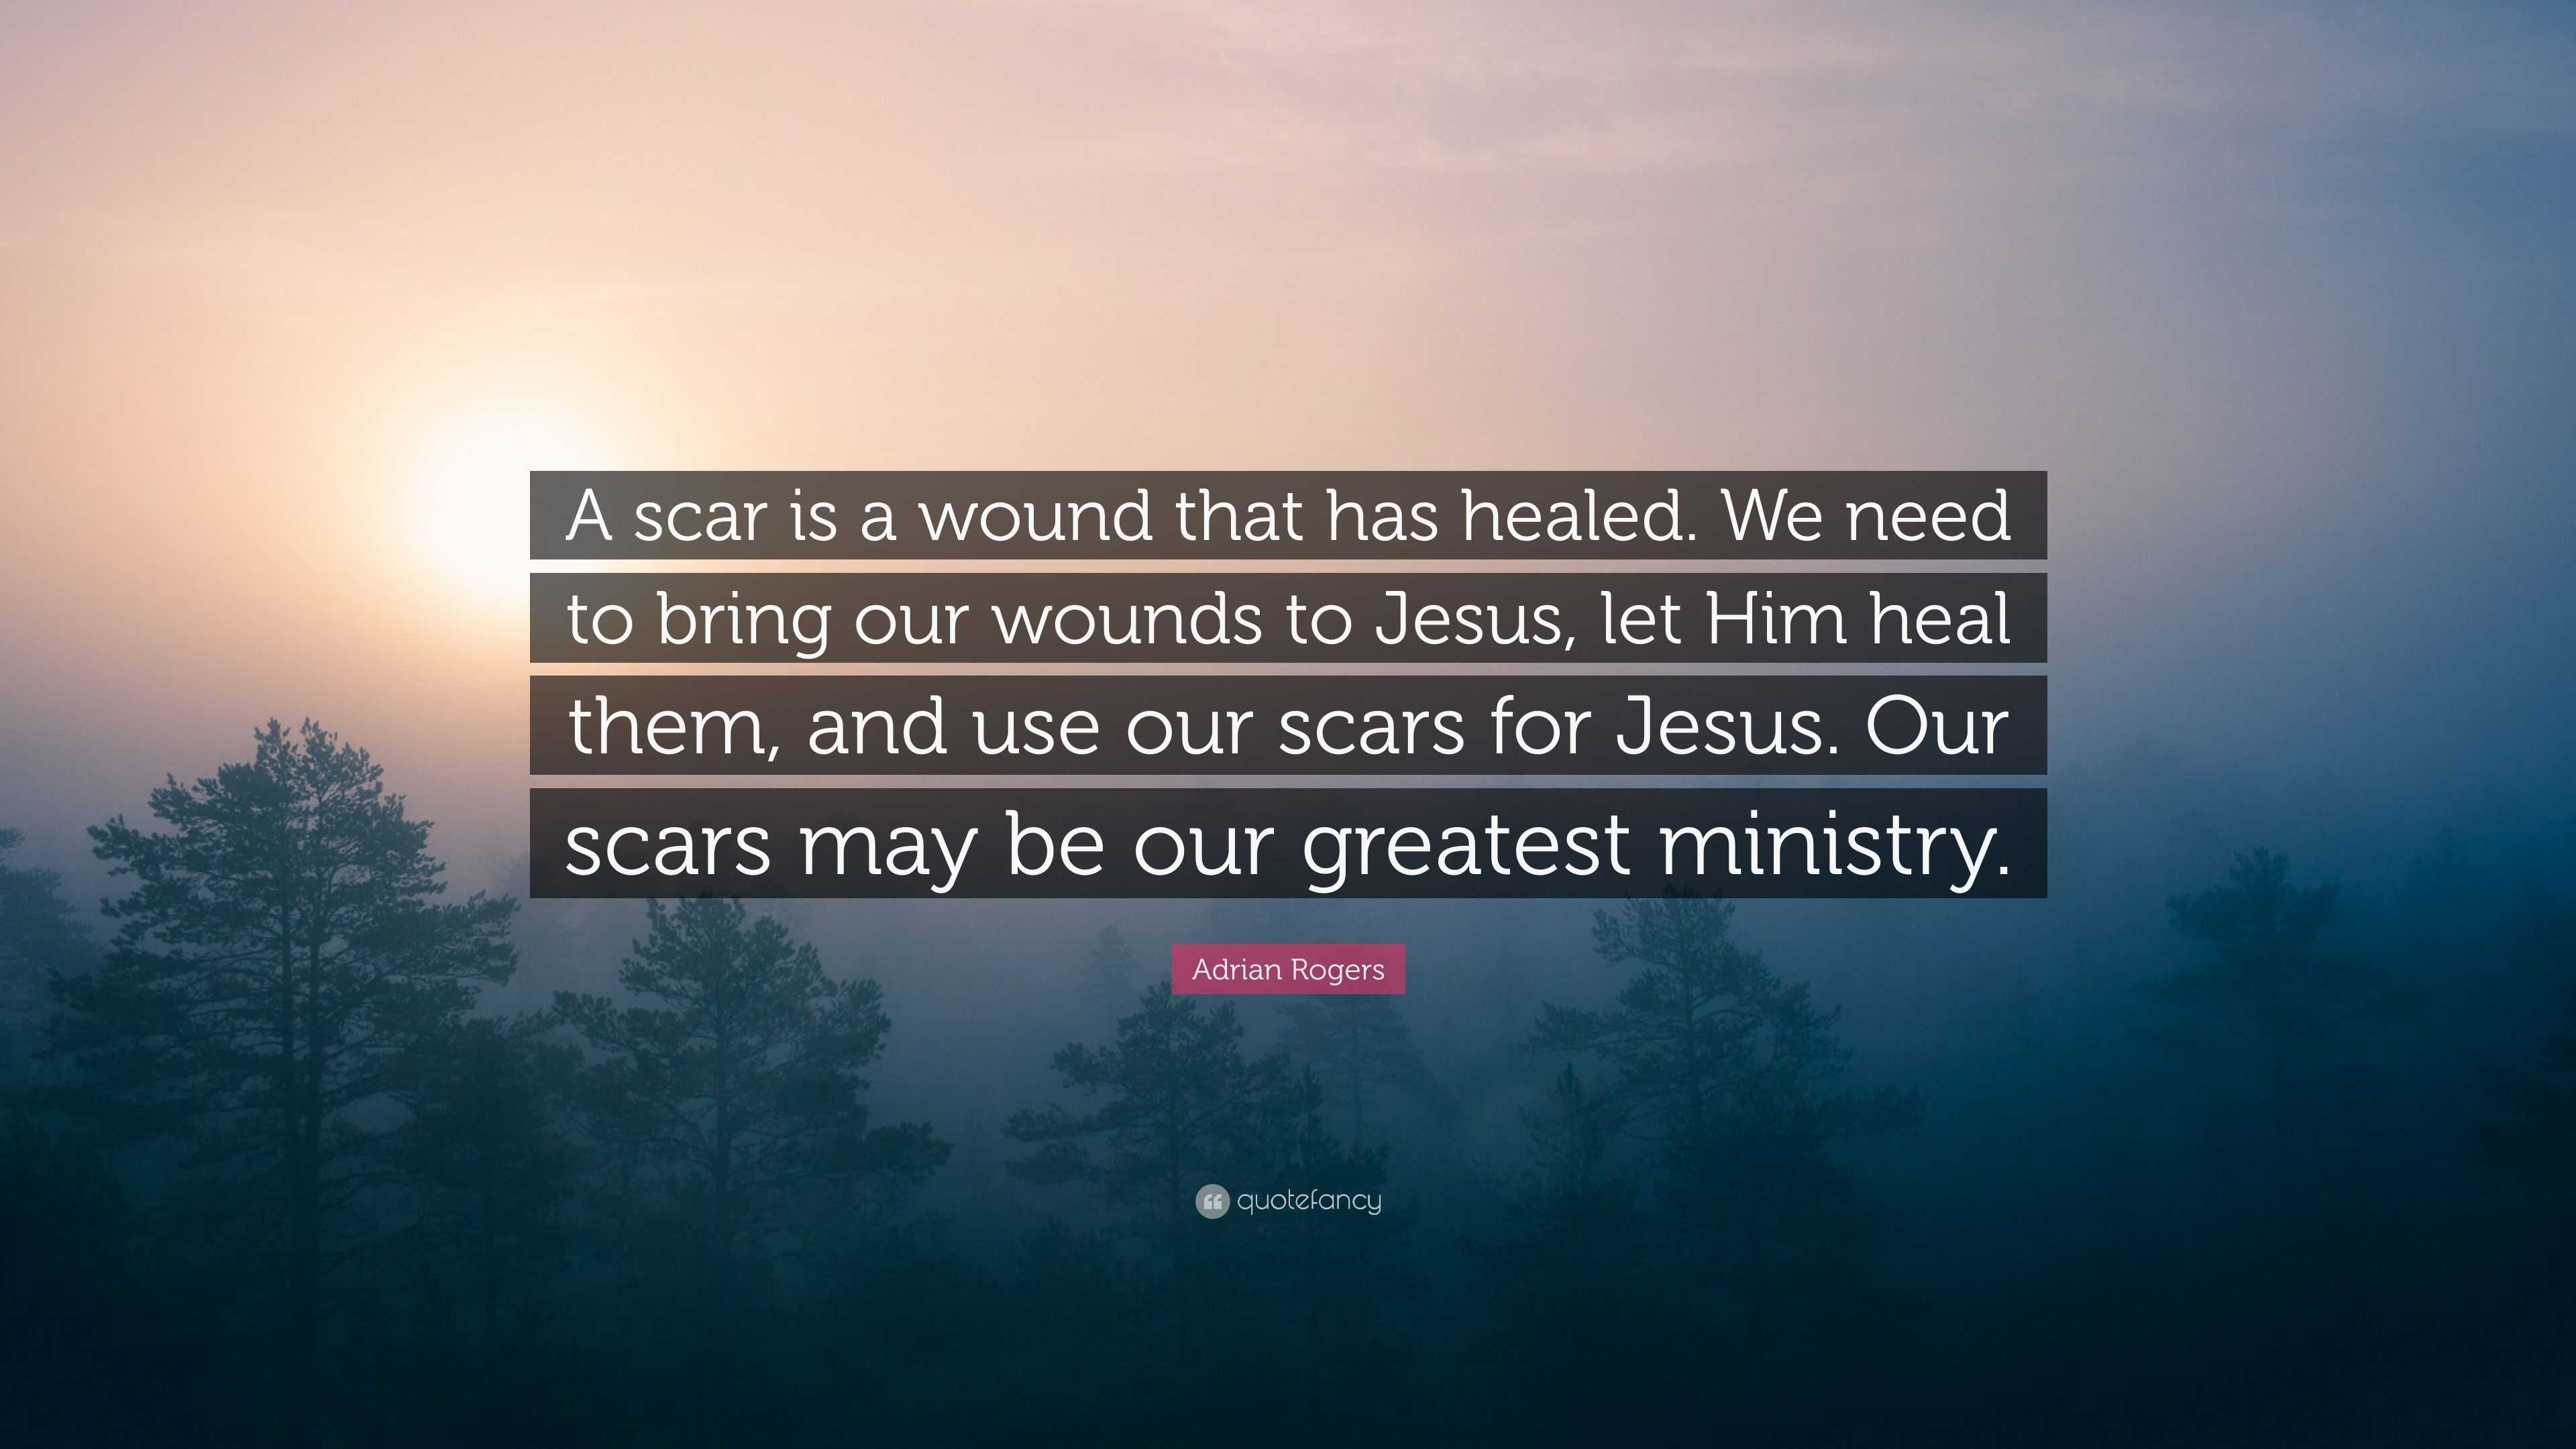 Adrian Rogers Quote: “A scar is a wound that has healed. We need to